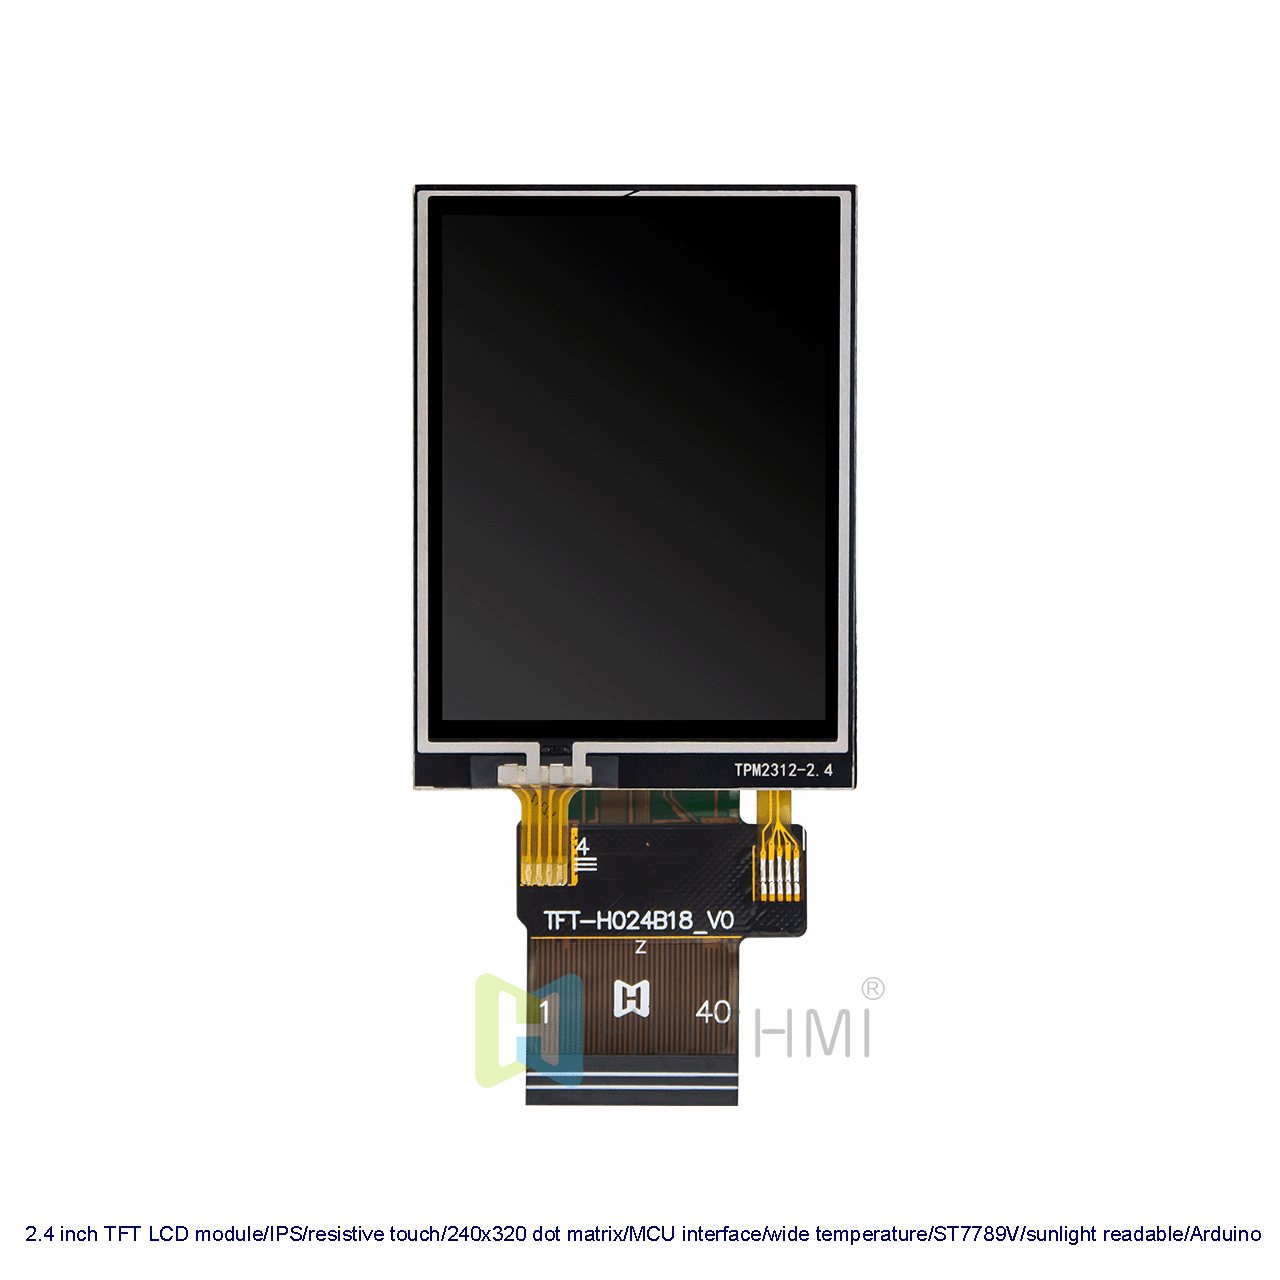 2.4 inch TFT LCD module/IPS/resistive touch/240x320 dot matrix/MCU interface/wide temperature/ST7789V/sunlight readable/Arduino compatible